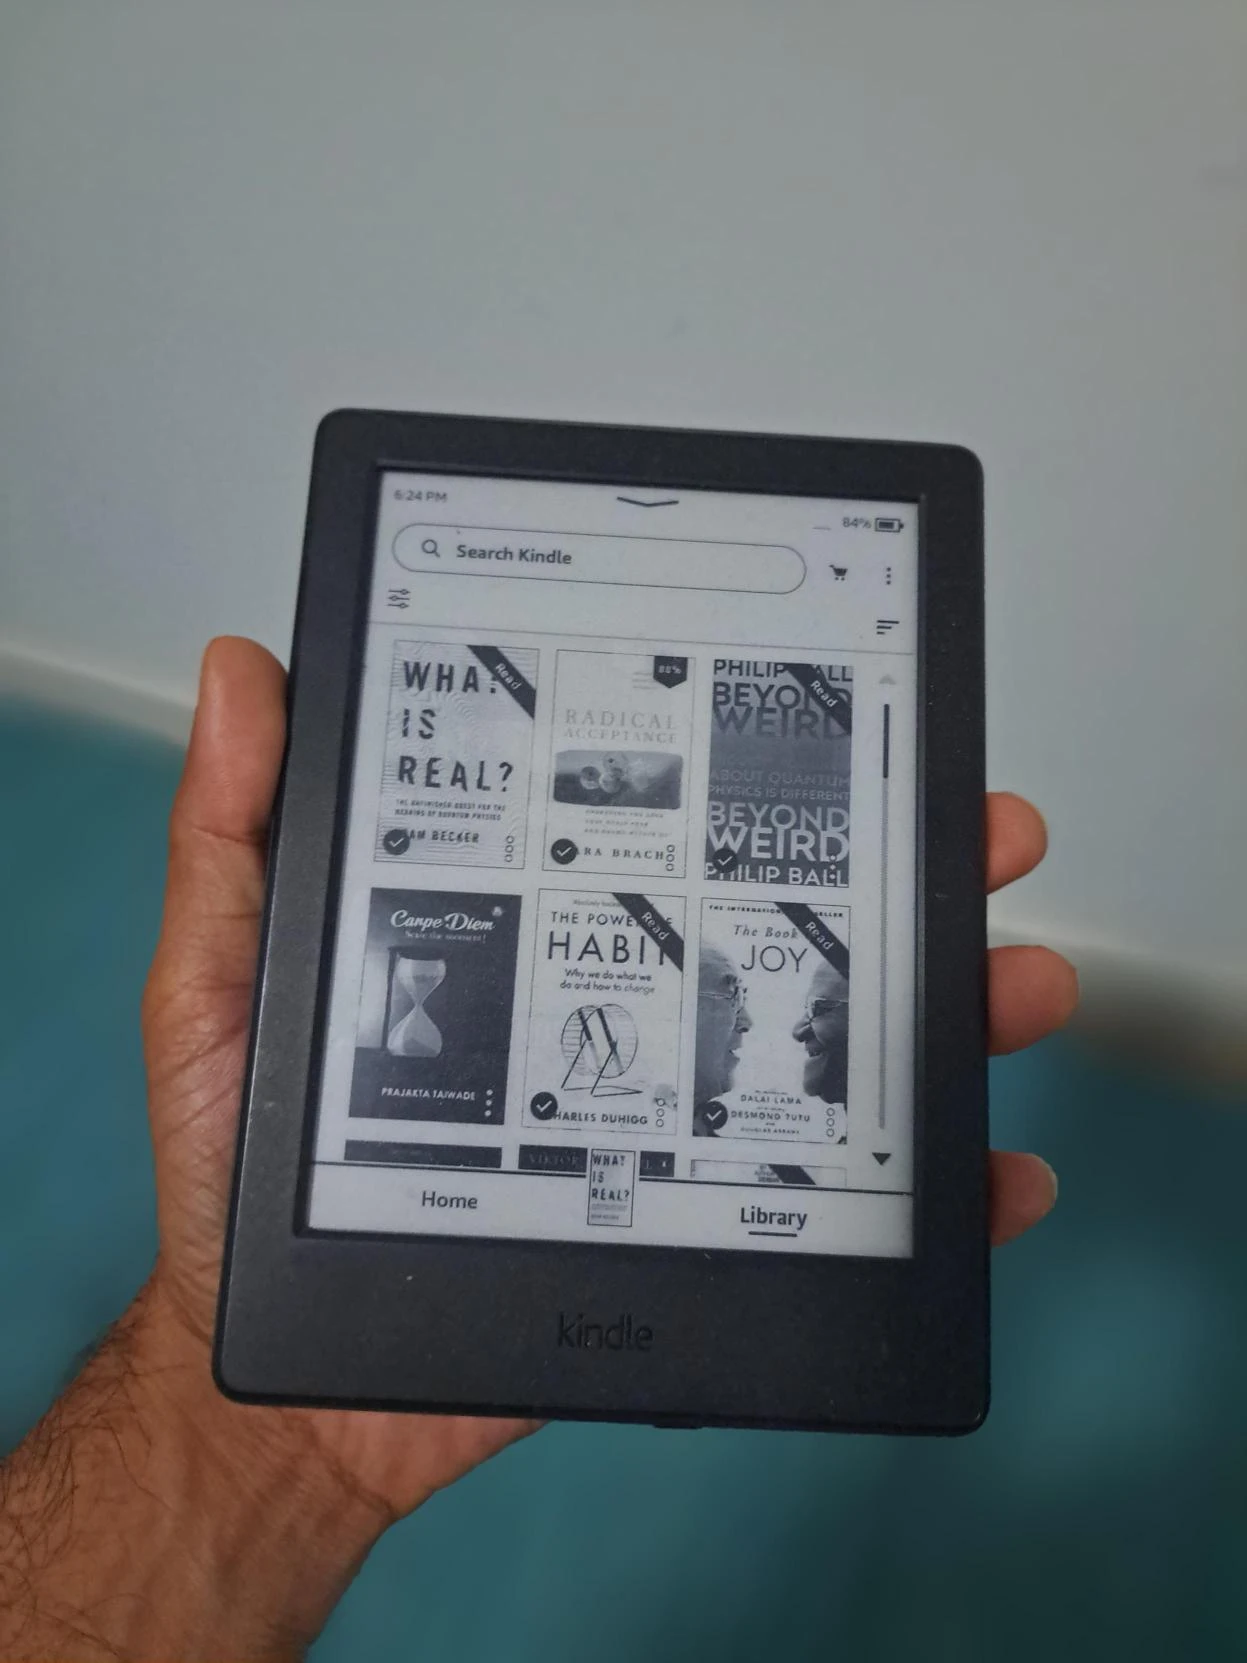 Picture of a kindle e-book reader demonstrating Aakash's liking for reading